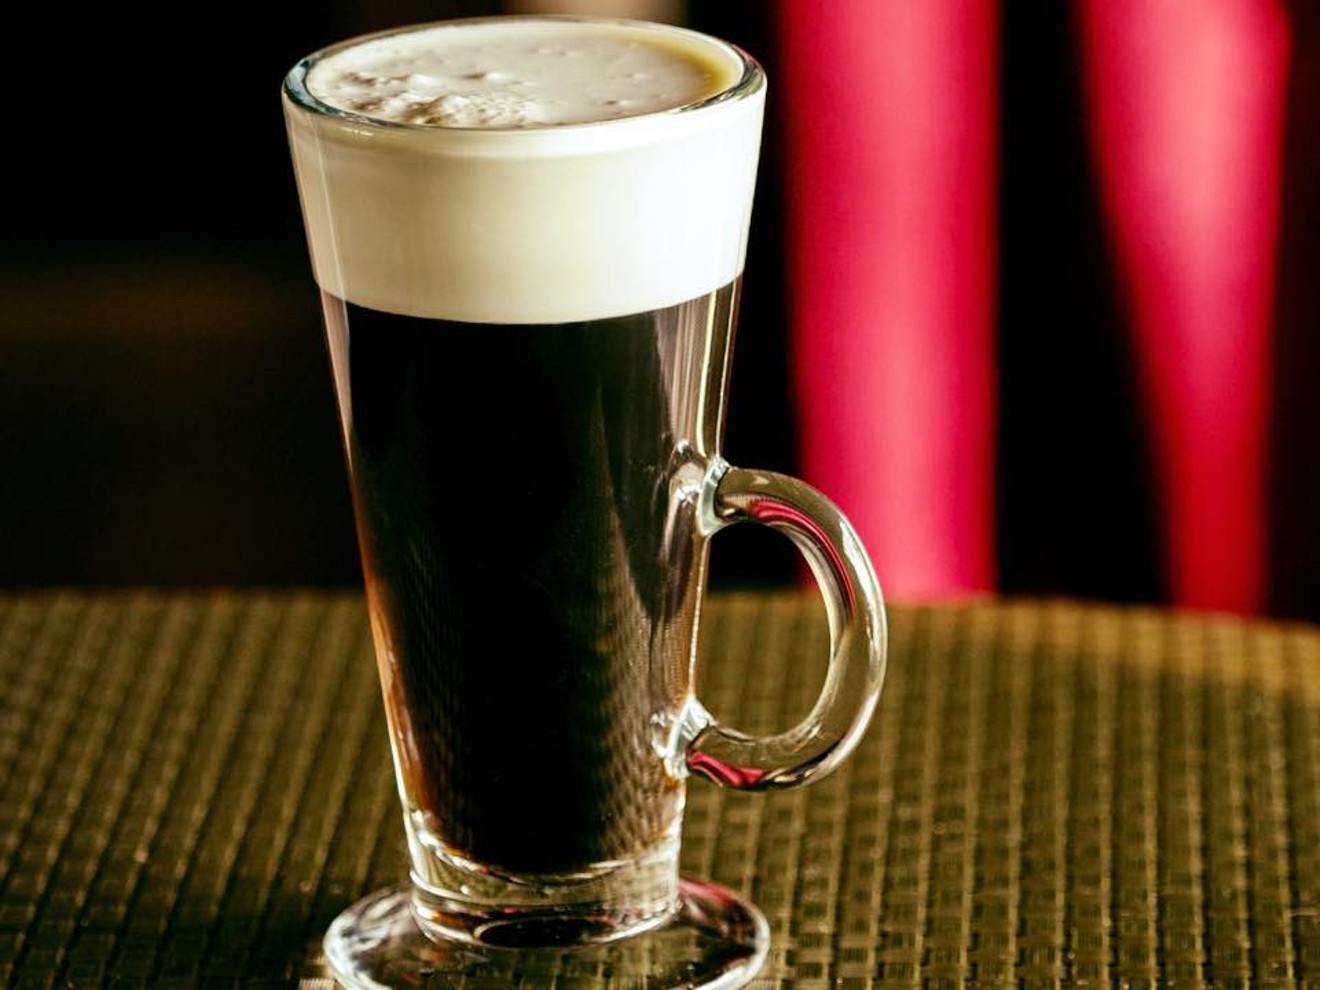 While it looks like any other Irish coffee, something beautiful lies within.